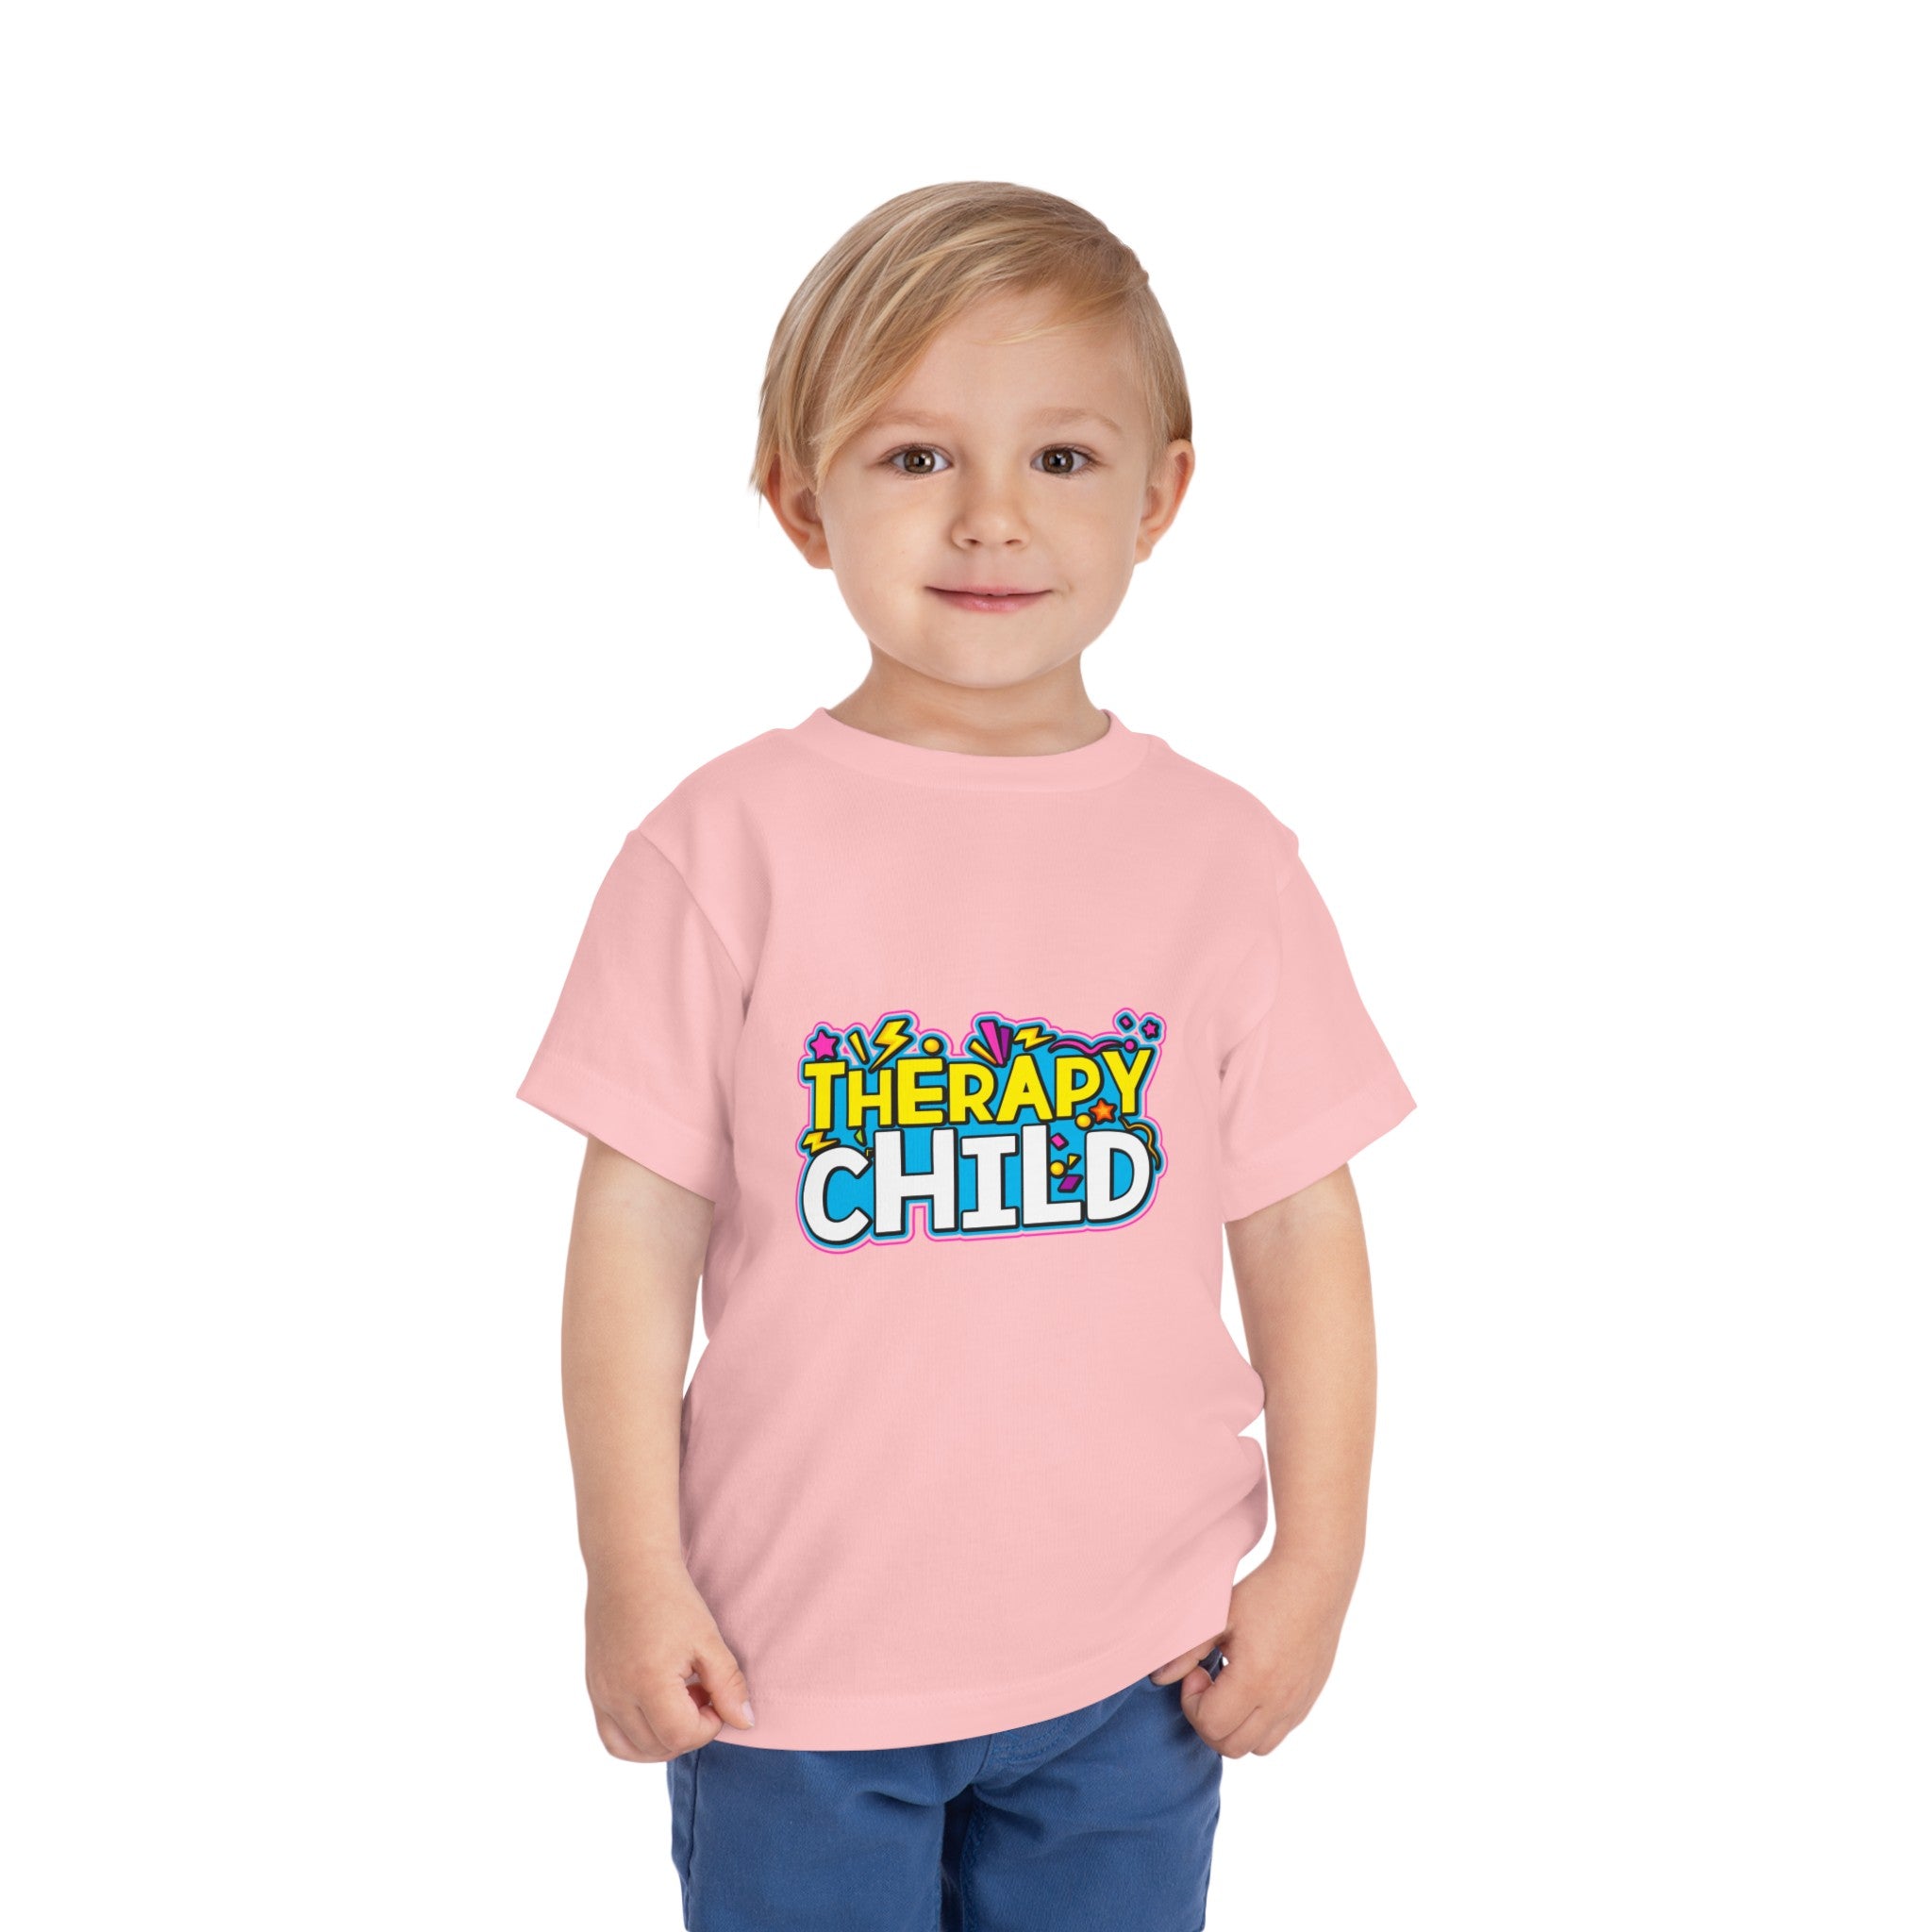 Therapy Child - Blue [Toddler Tee]